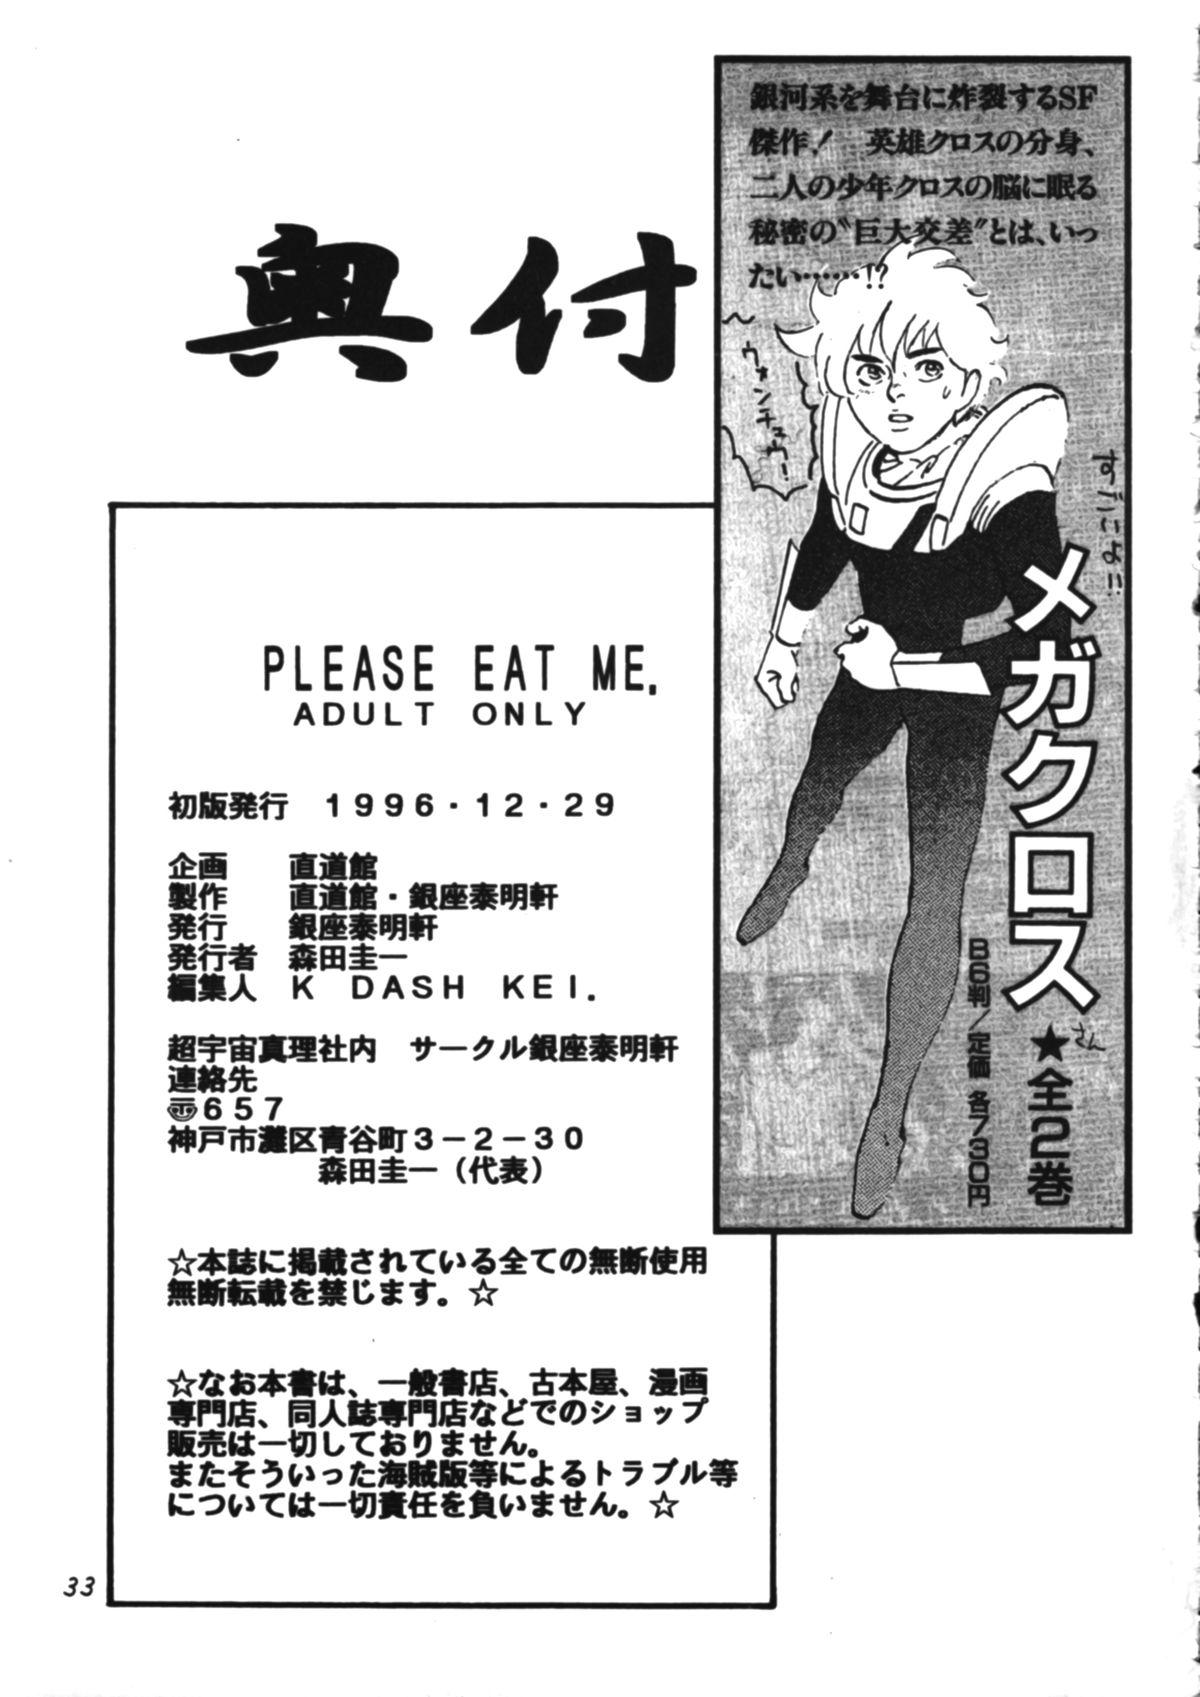 Fetish PLEASE EAT ME - Tokimeki memorial Old Young - Page 32